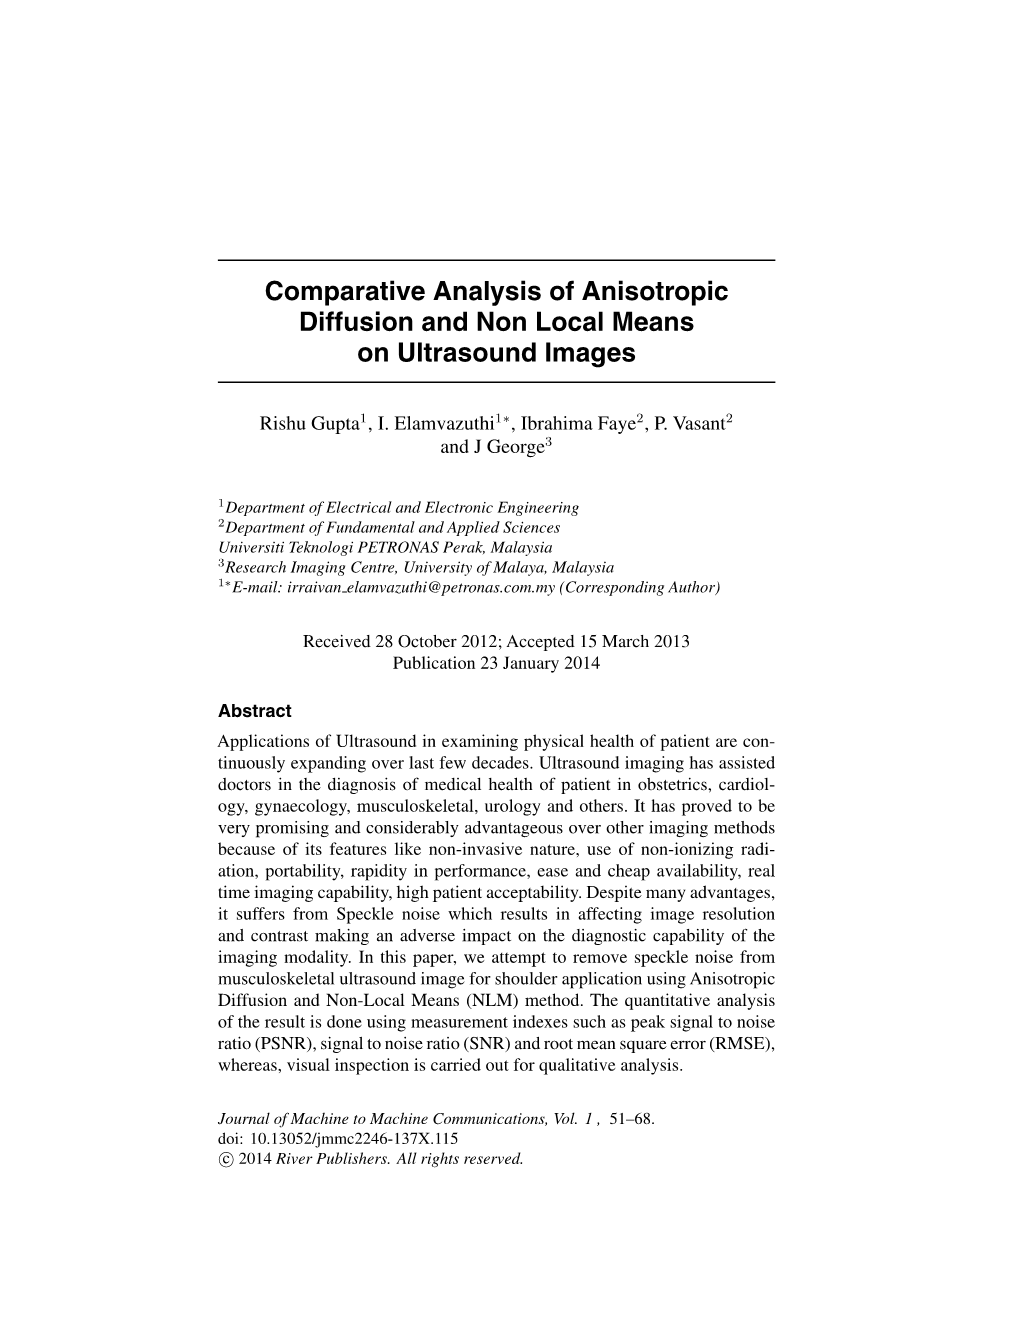 Comparative Analysis of Anisotropic Diffusion and Non Local Means on Ultrasound Images